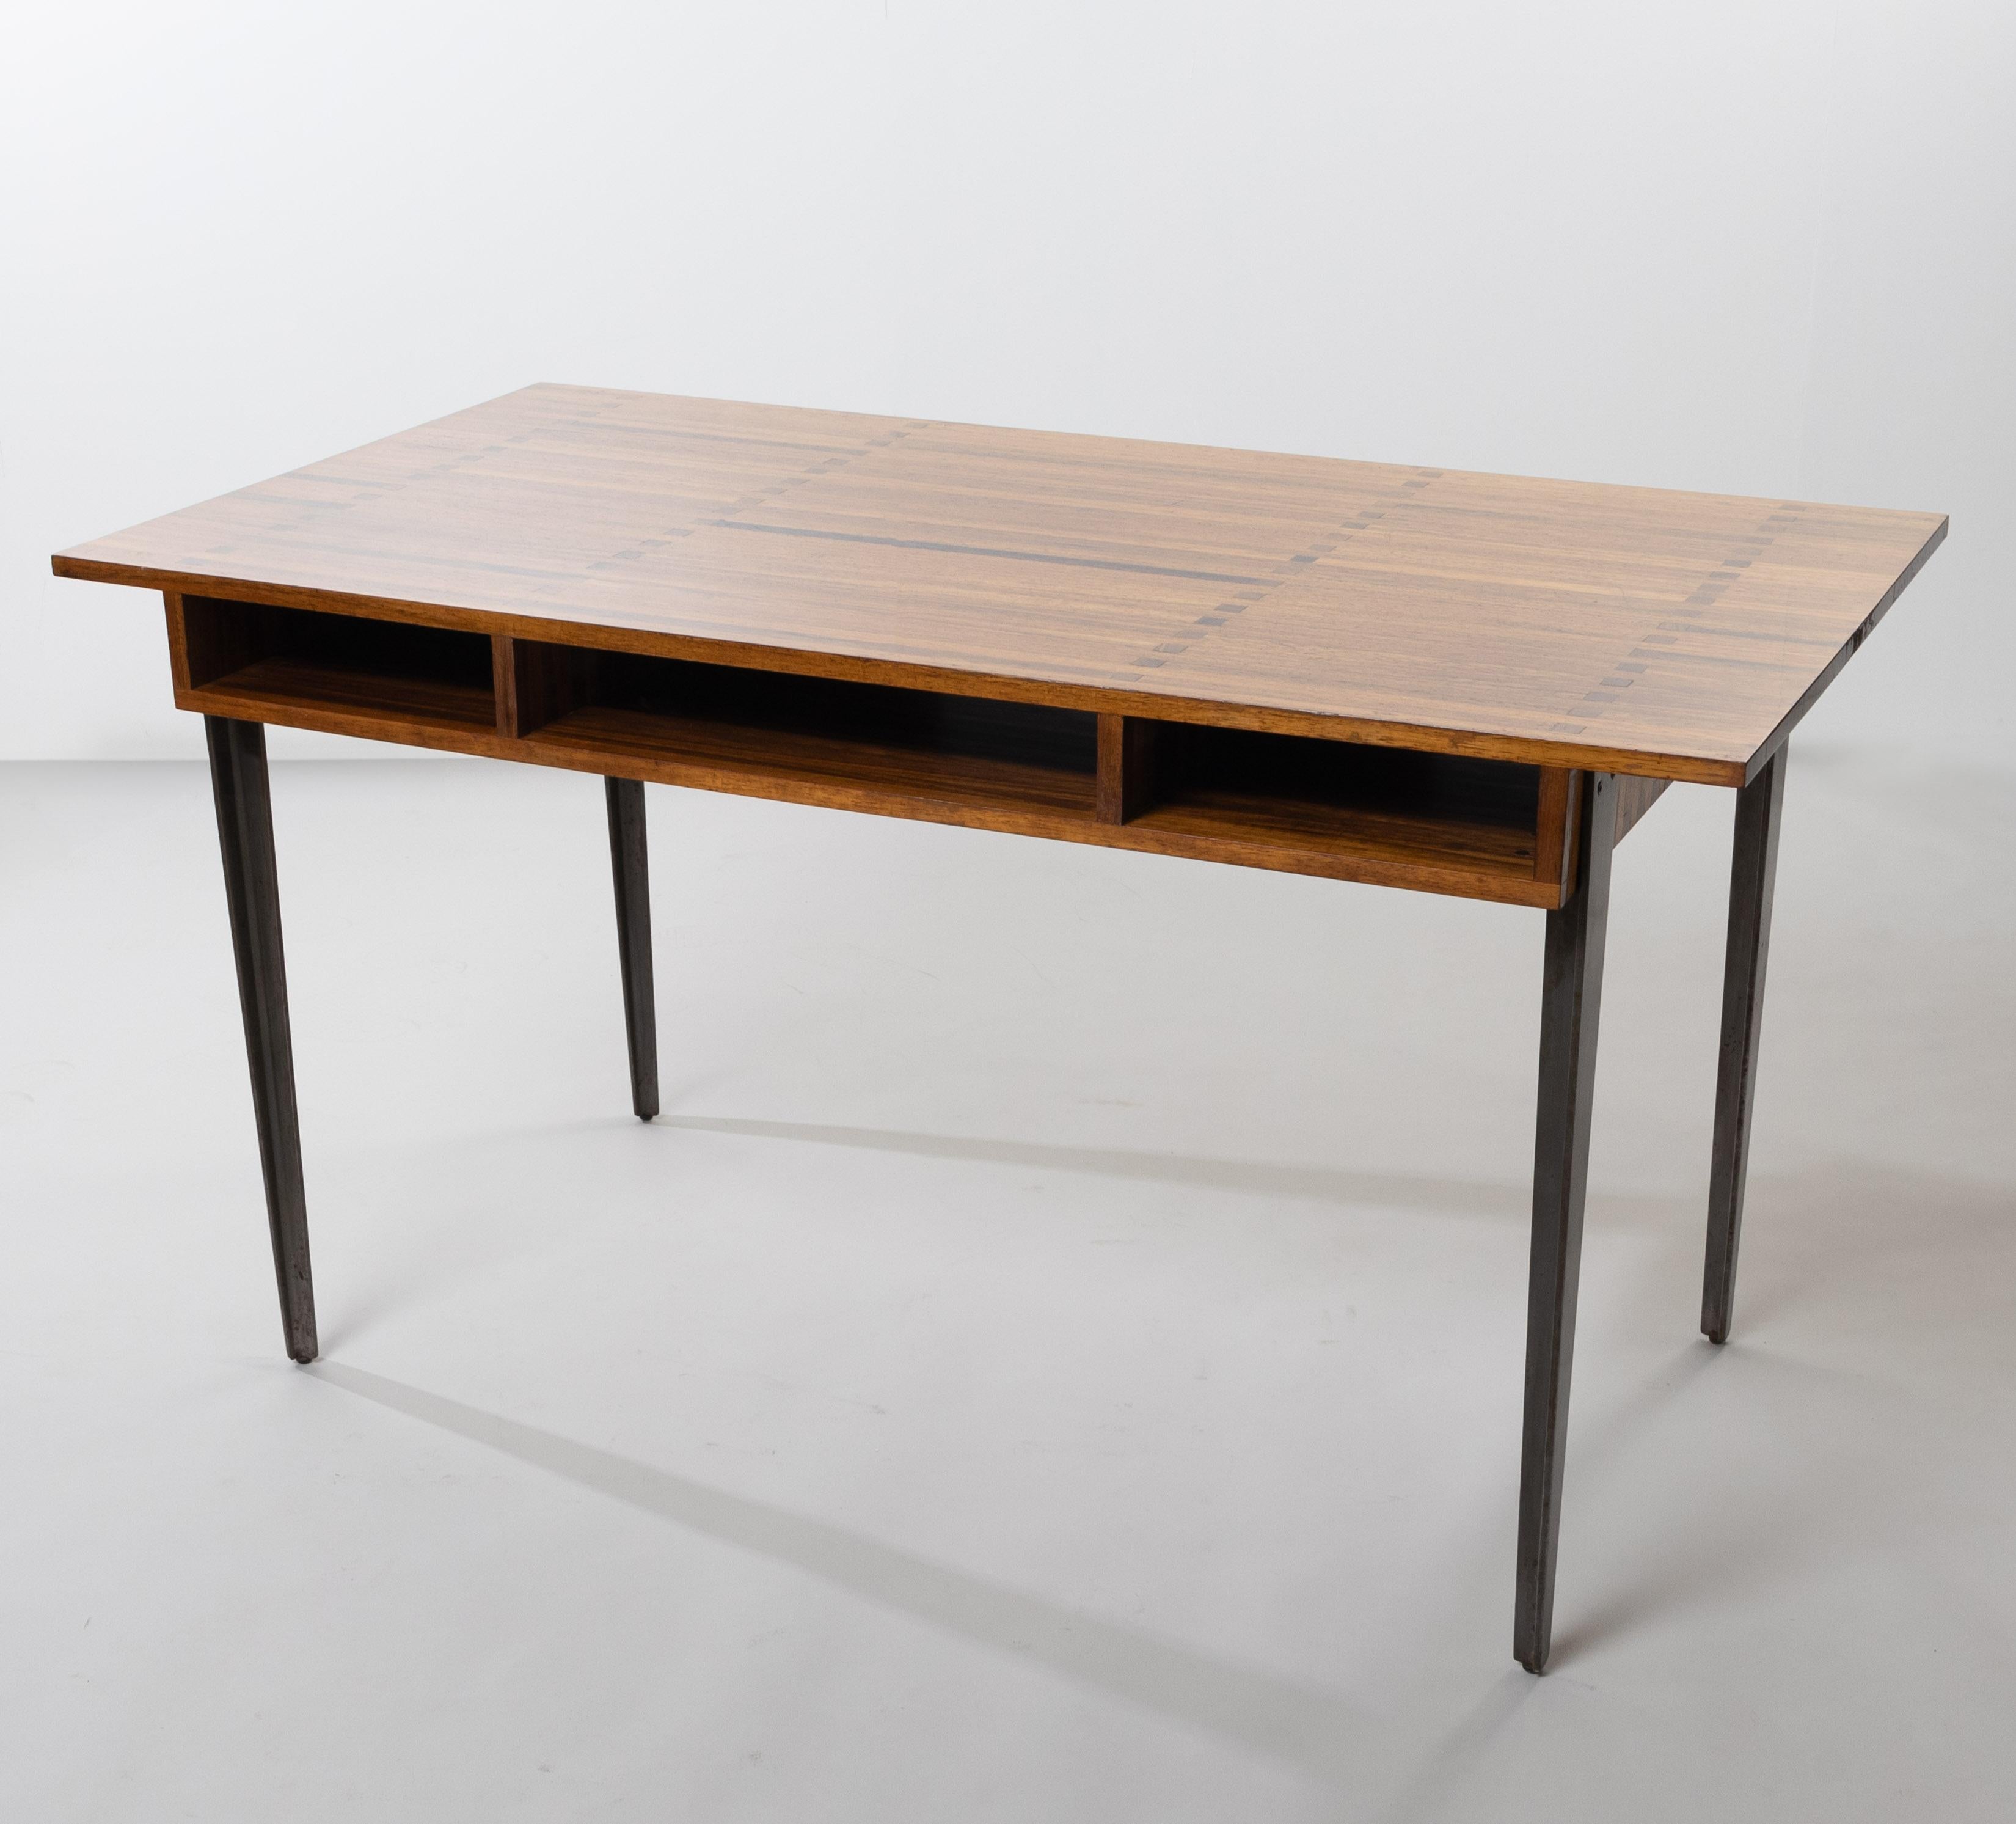 Desk table called “Gerard Philipe” by Jules Wabbes.
Solid laminated Padouk desk resting on 4 steel legs with “gun barrel” finish.
3 storage under the top.
The model takes its name from the actor Gérard Philipe (F) (Gérard Albert Philip 1922 – 1959)